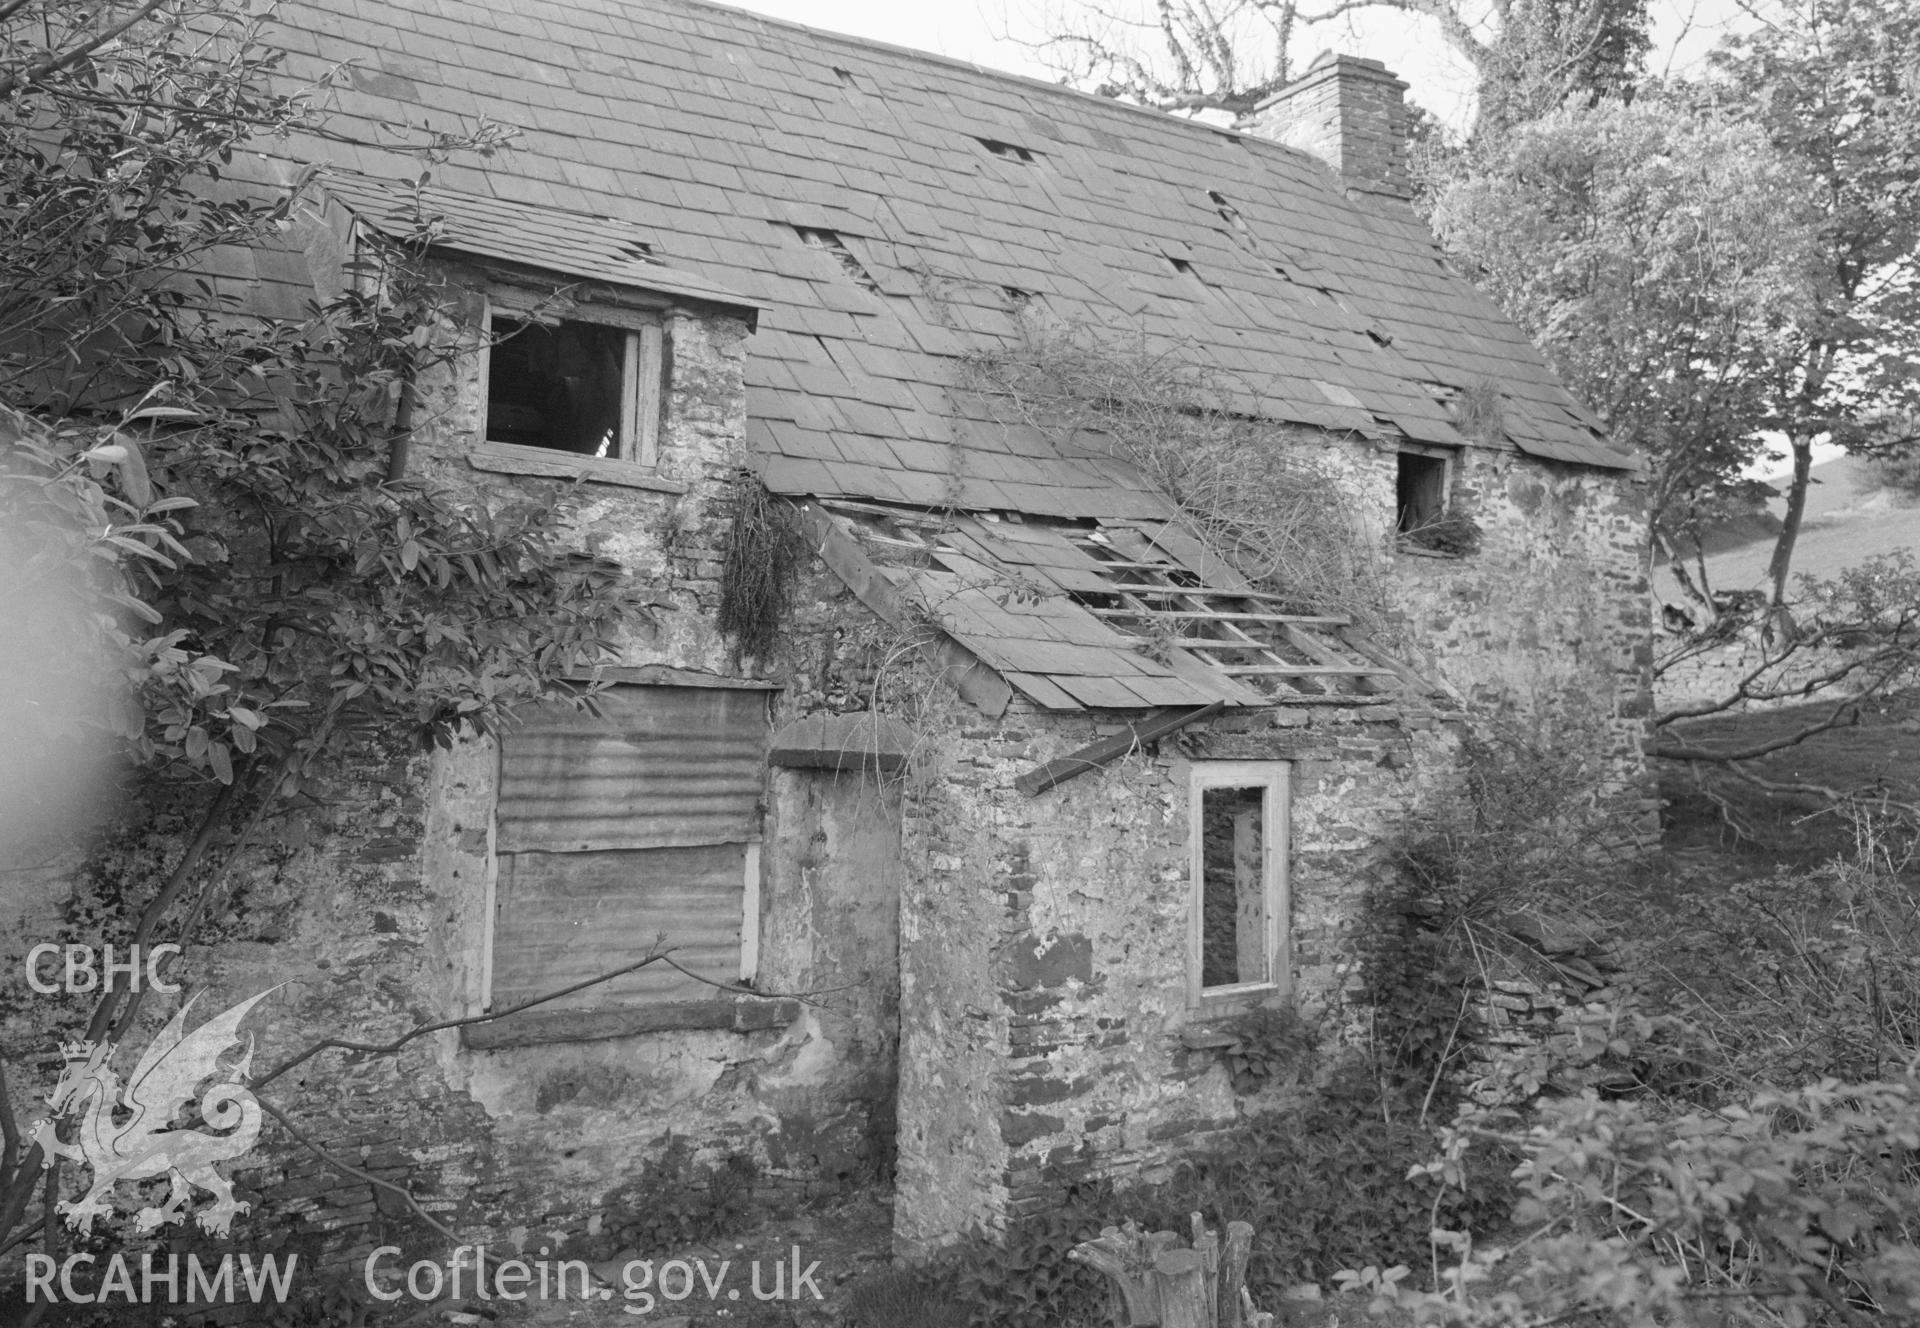 Digital copy of a black and white negative showing Ty'n y Waun, Bettws.